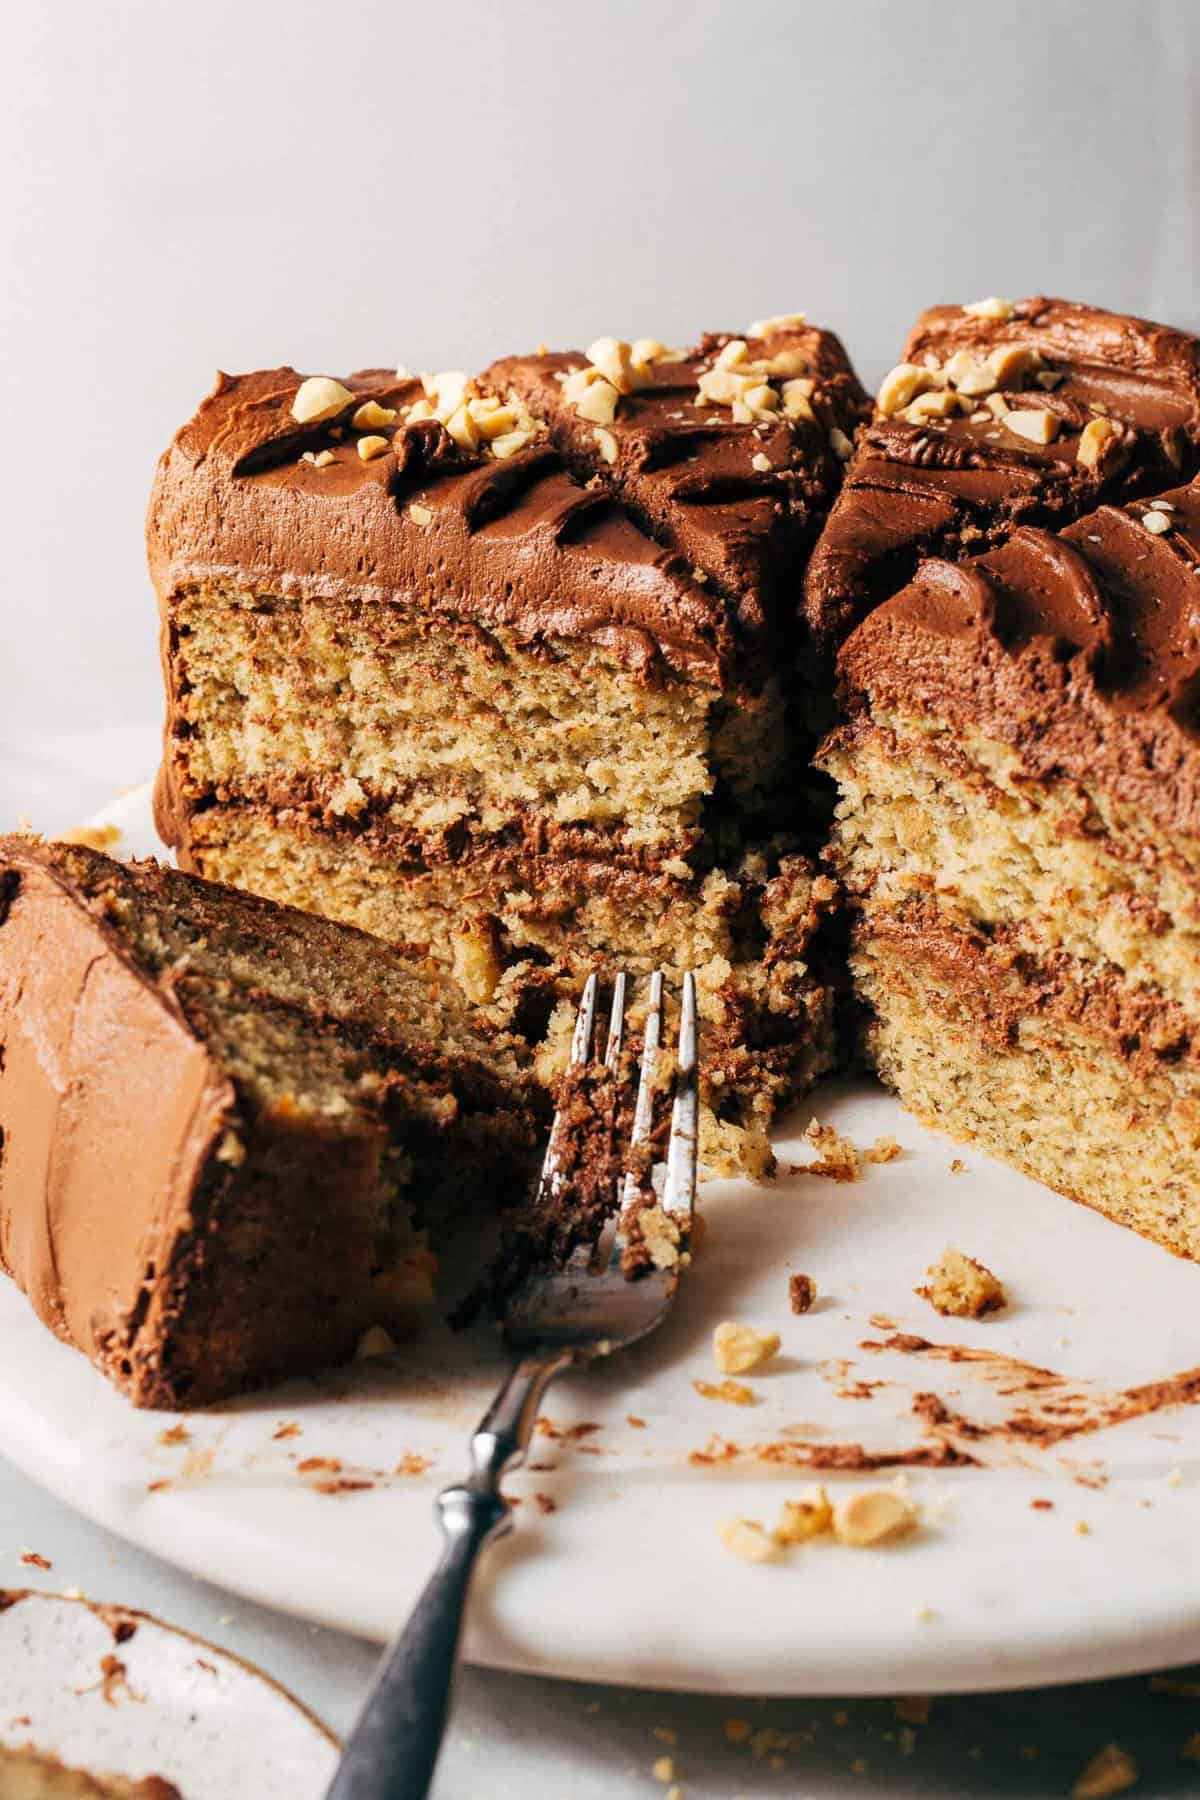 Banana Cake with Peanut Butter Chocolate Frosting